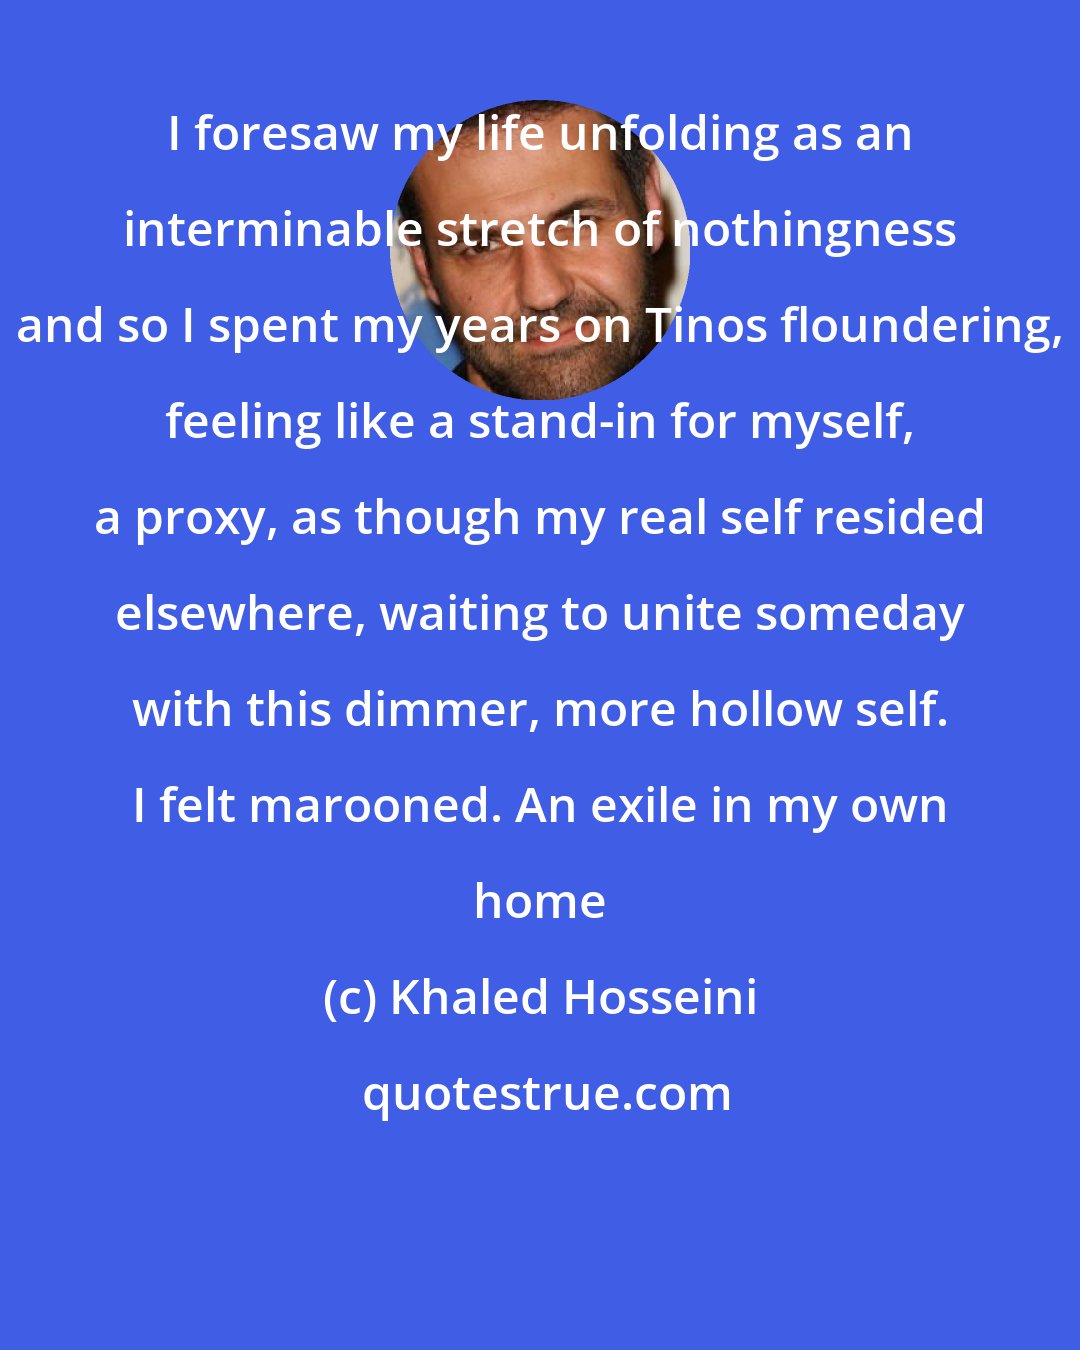 Khaled Hosseini: I foresaw my life unfolding as an interminable stretch of nothingness and so I spent my years on Tinos floundering, feeling like a stand-in for myself, a proxy, as though my real self resided elsewhere, waiting to unite someday with this dimmer, more hollow self. I felt marooned. An exile in my own home